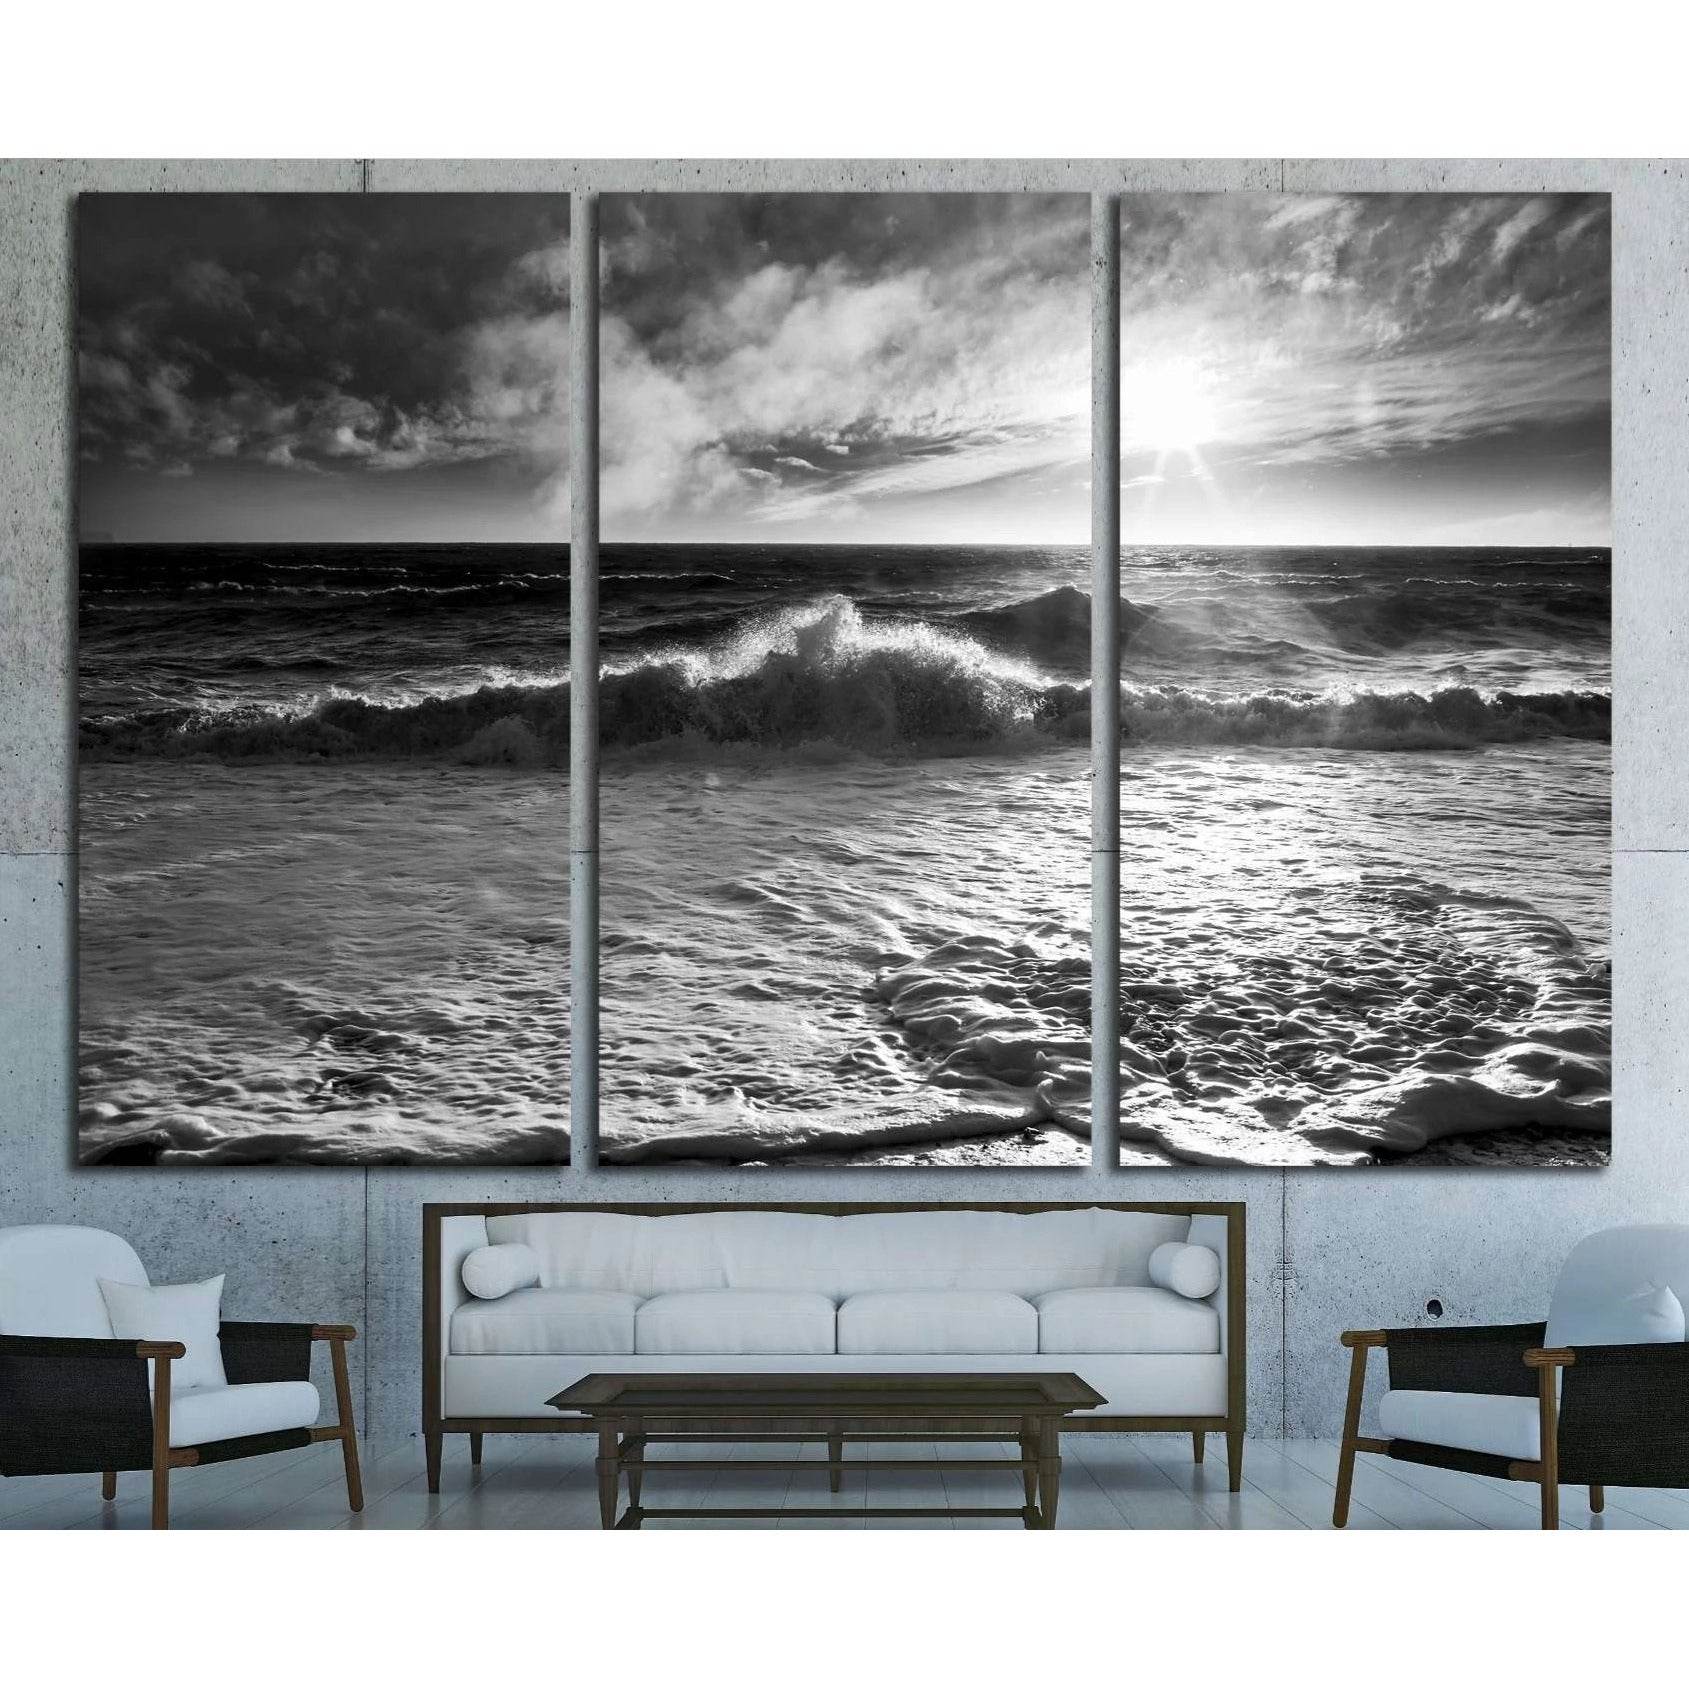 Ocean waves with a sunburst and lens flare on a windy day in black and white. №2925 Ready to Hang Canvas Print